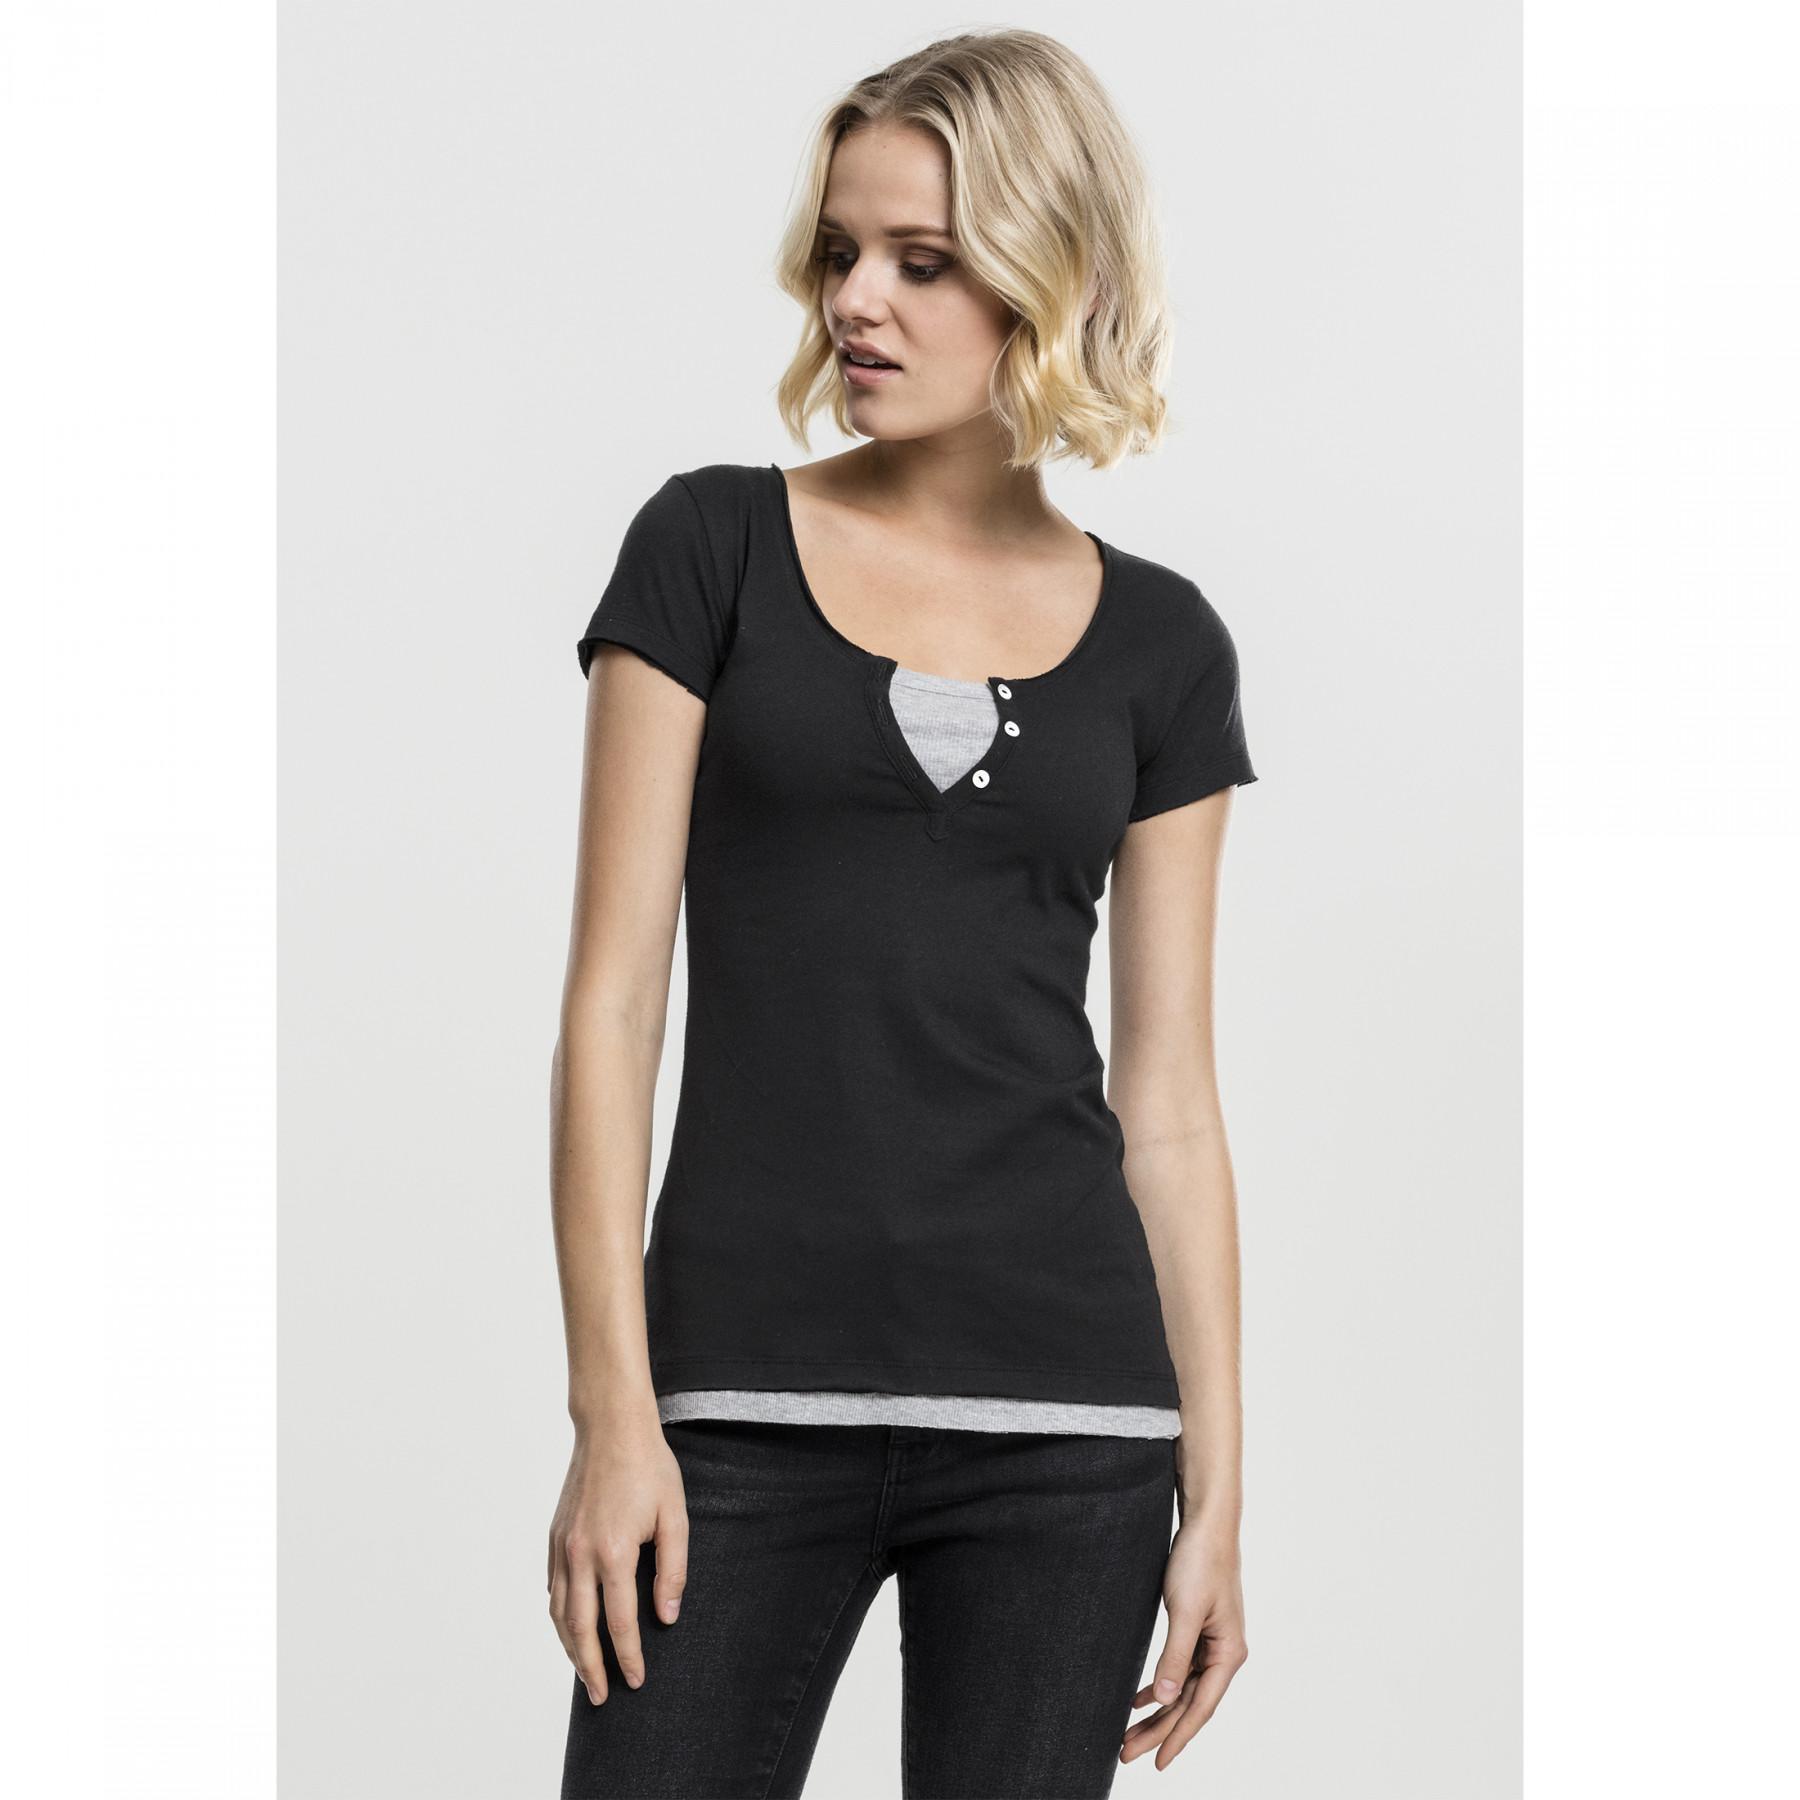 Woman's Urban Classic two-colored t-shirt t-